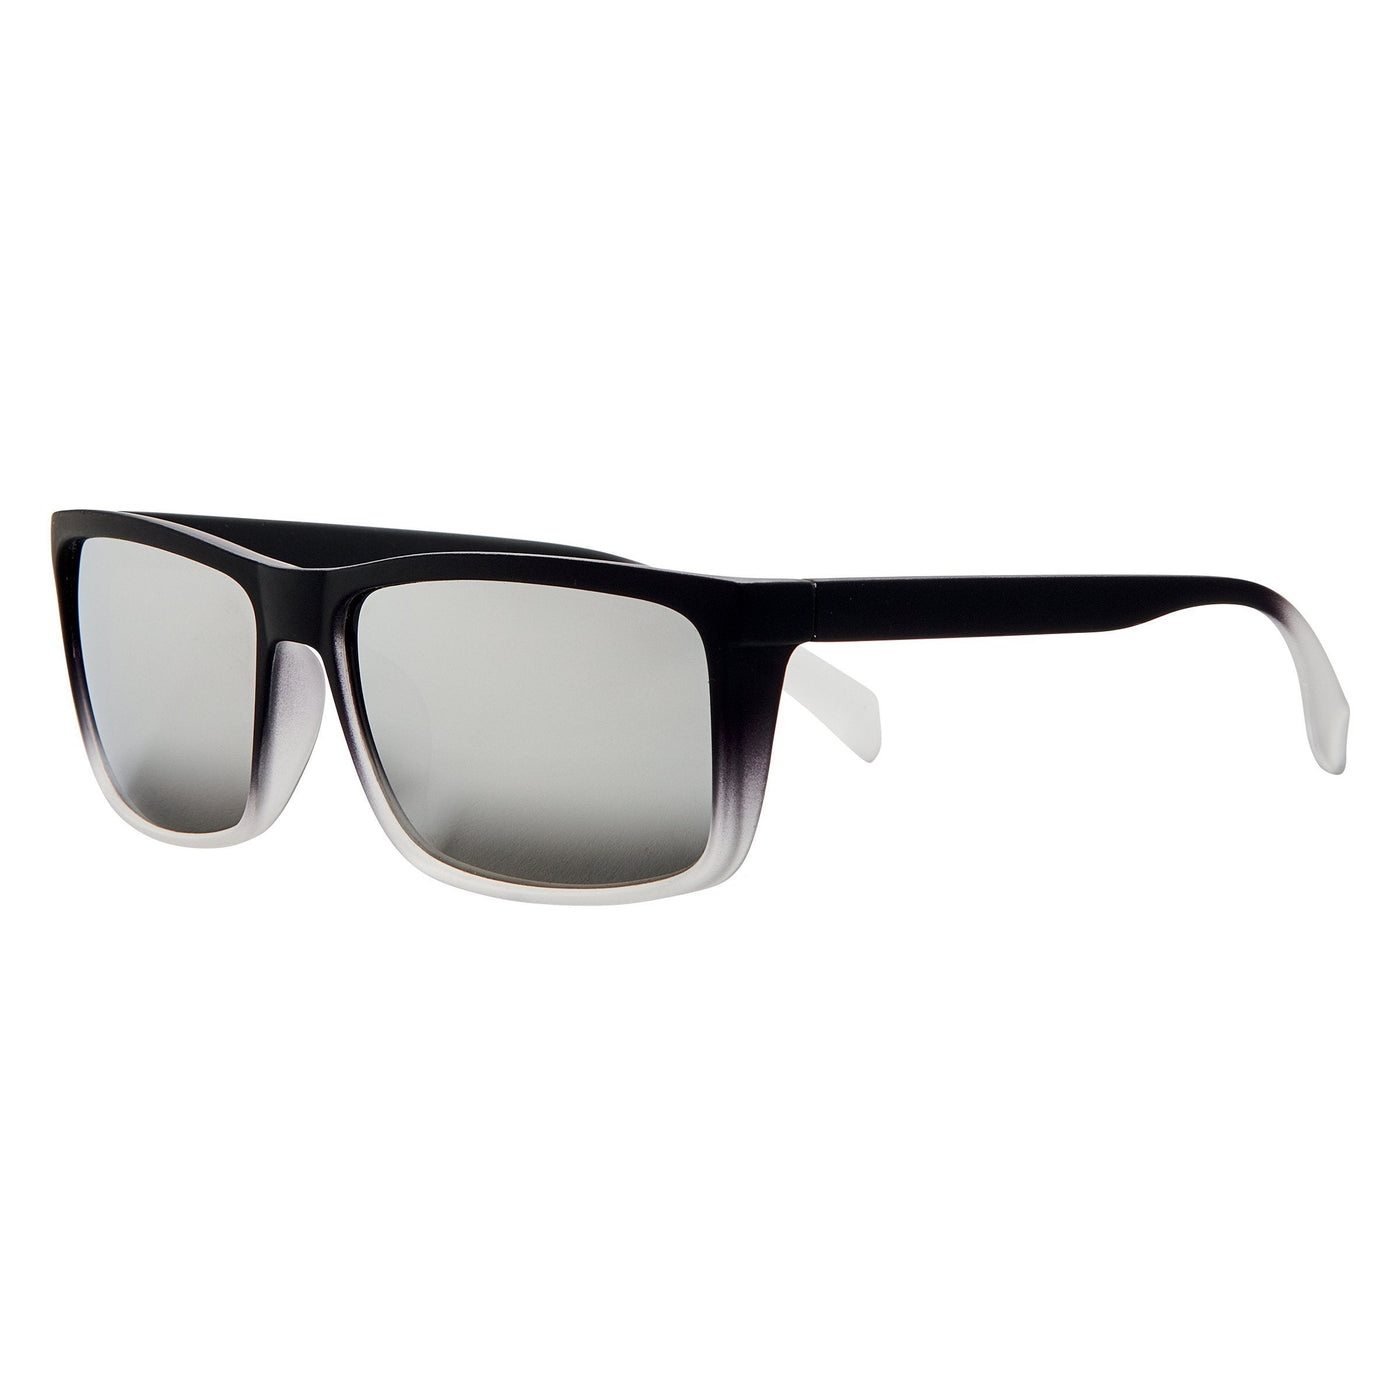 SUNGLASSES - Mens Ombre Rubberized Flat Top Frame W/ Silver Mirror Lens